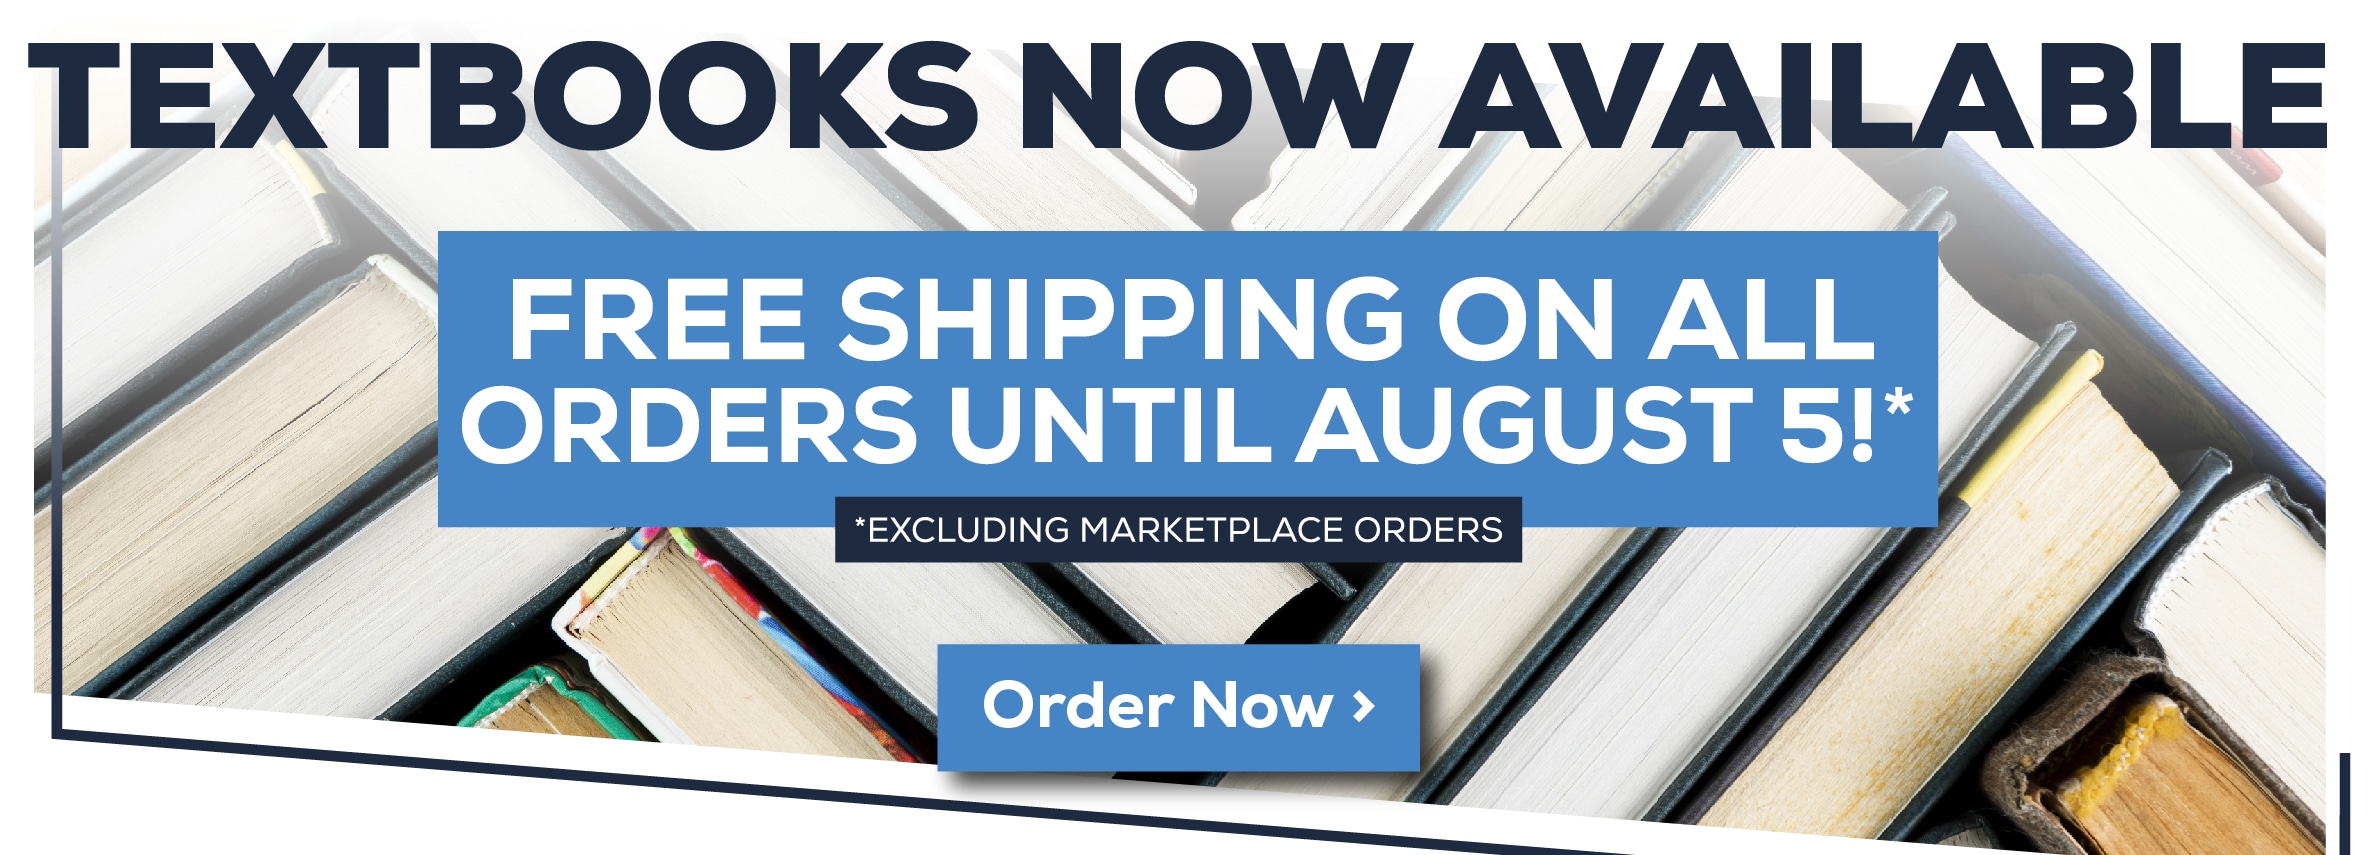 Textbooks Now Available. Free shipping on all orders until August 5. Excluding marketplace orders. Order now!